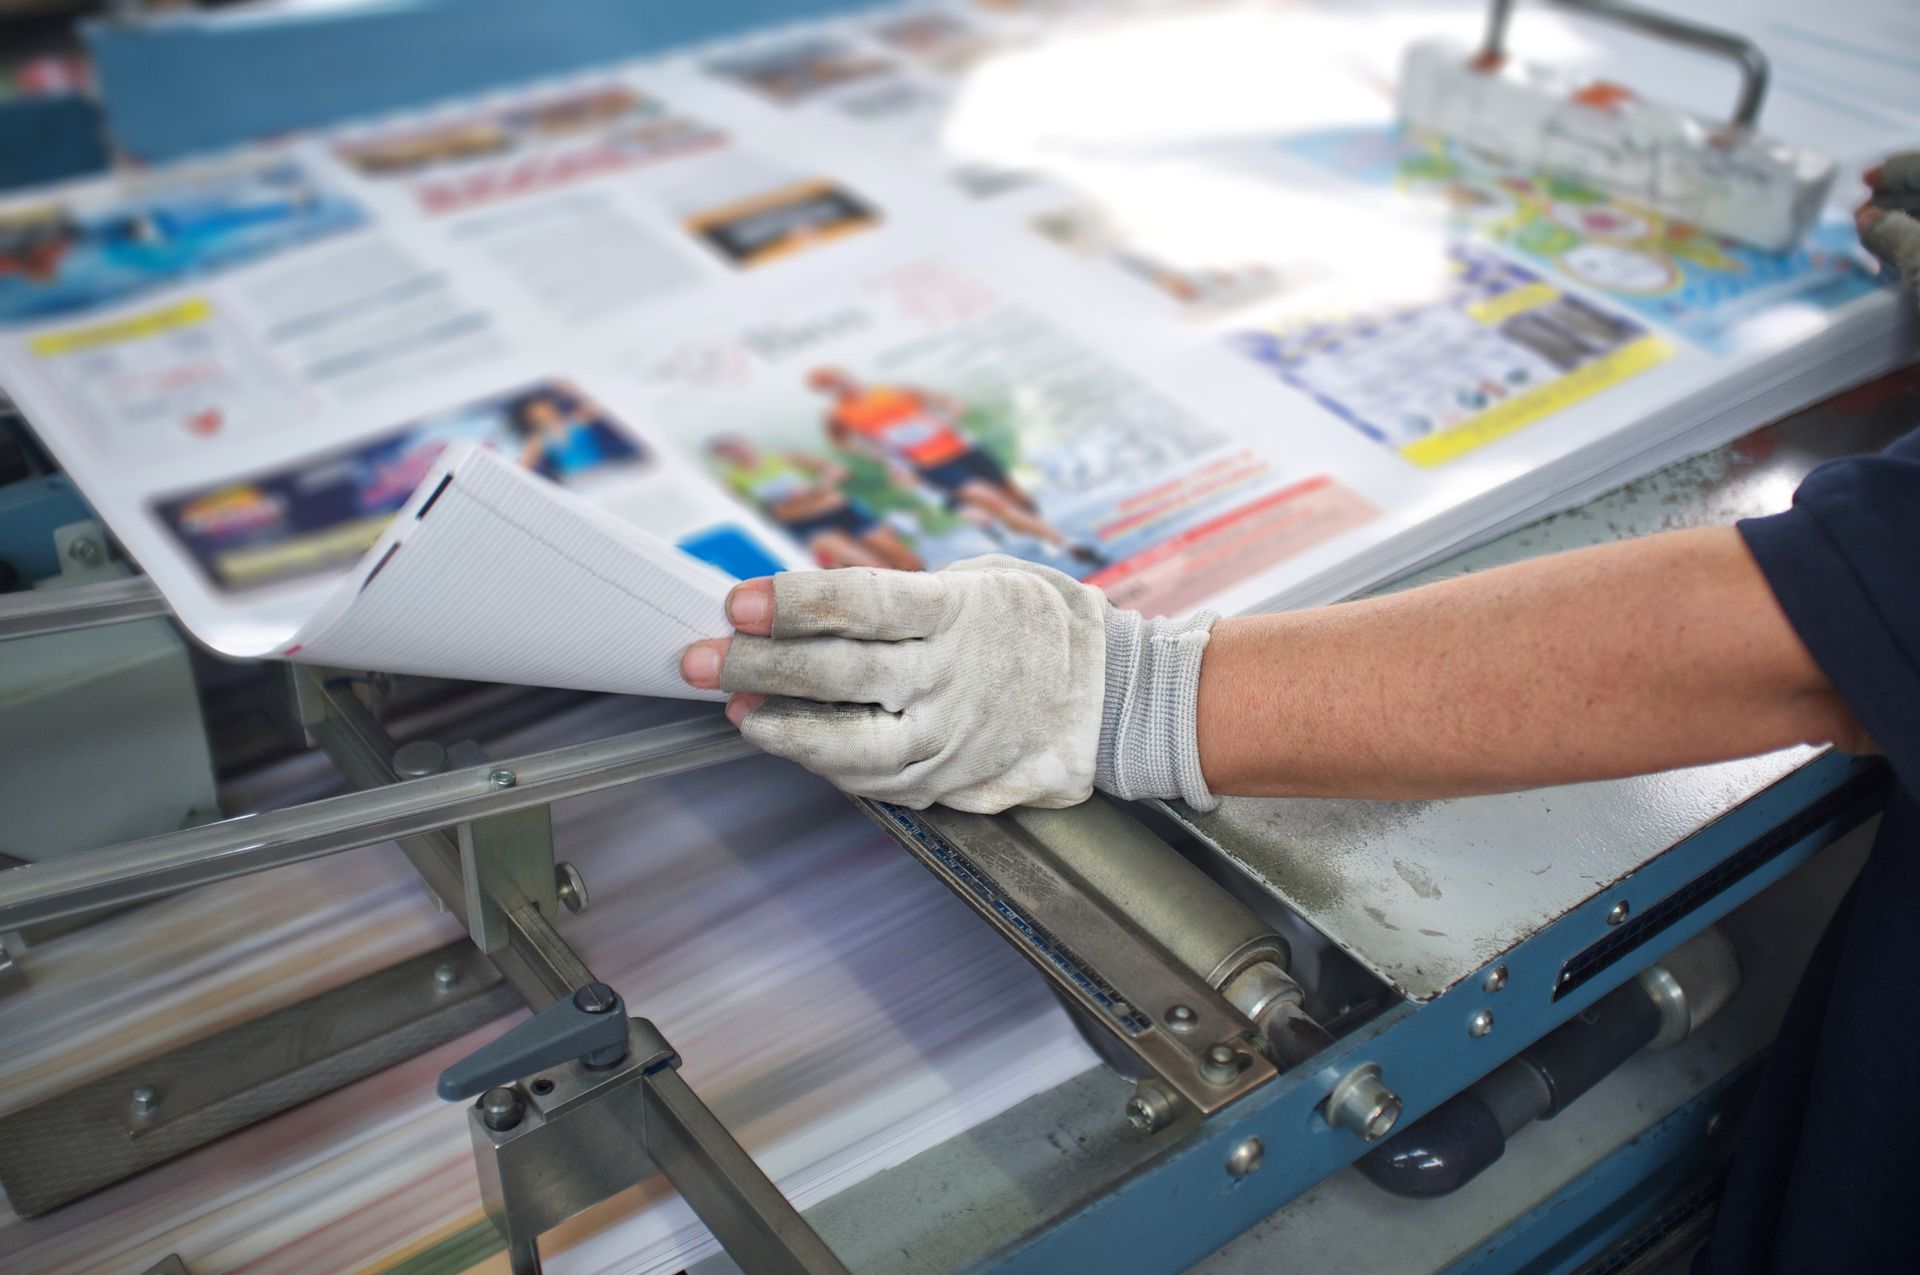 Laguna Hills Commercial Printing Services